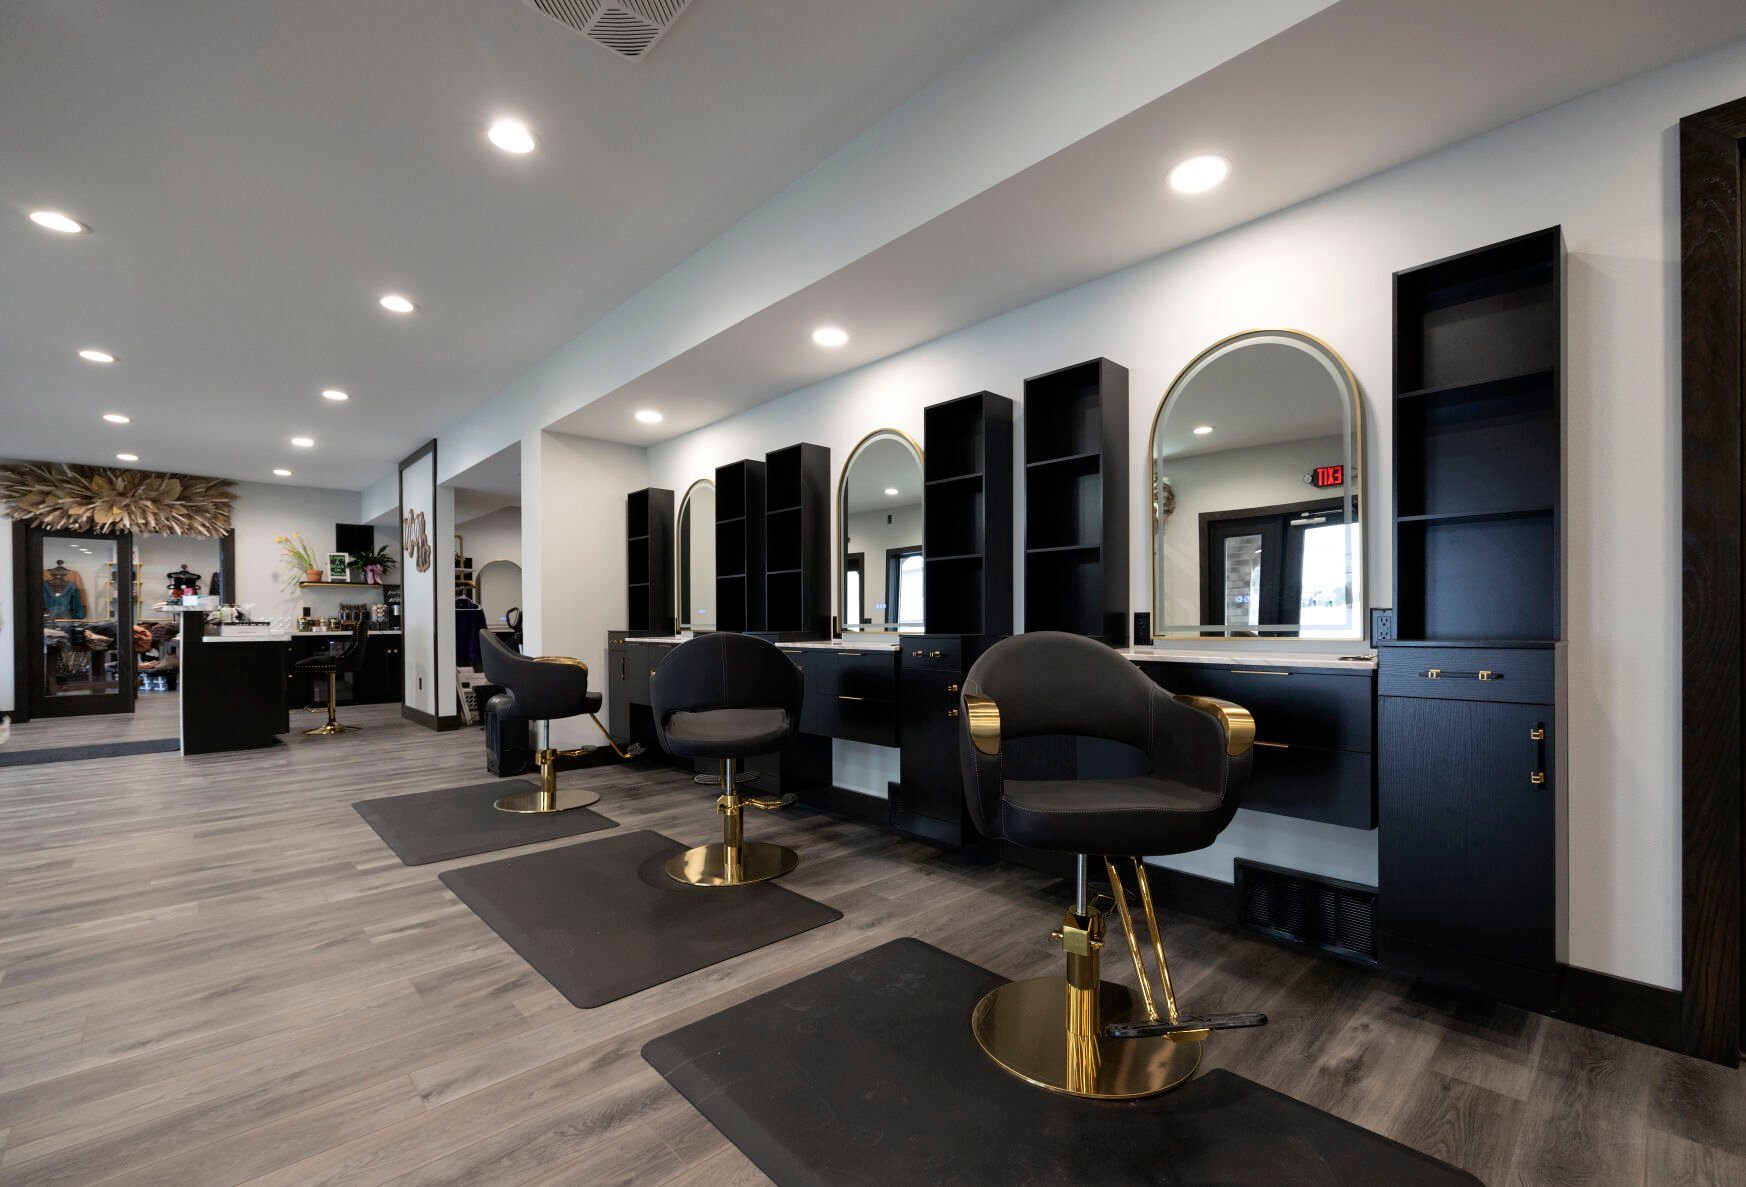 Maen & Co. Salon and Spa will open on Thursday and is connected by an interior door to Ivy & Thread Boutique.    PHOTO CREDIT: Stephen Gassman